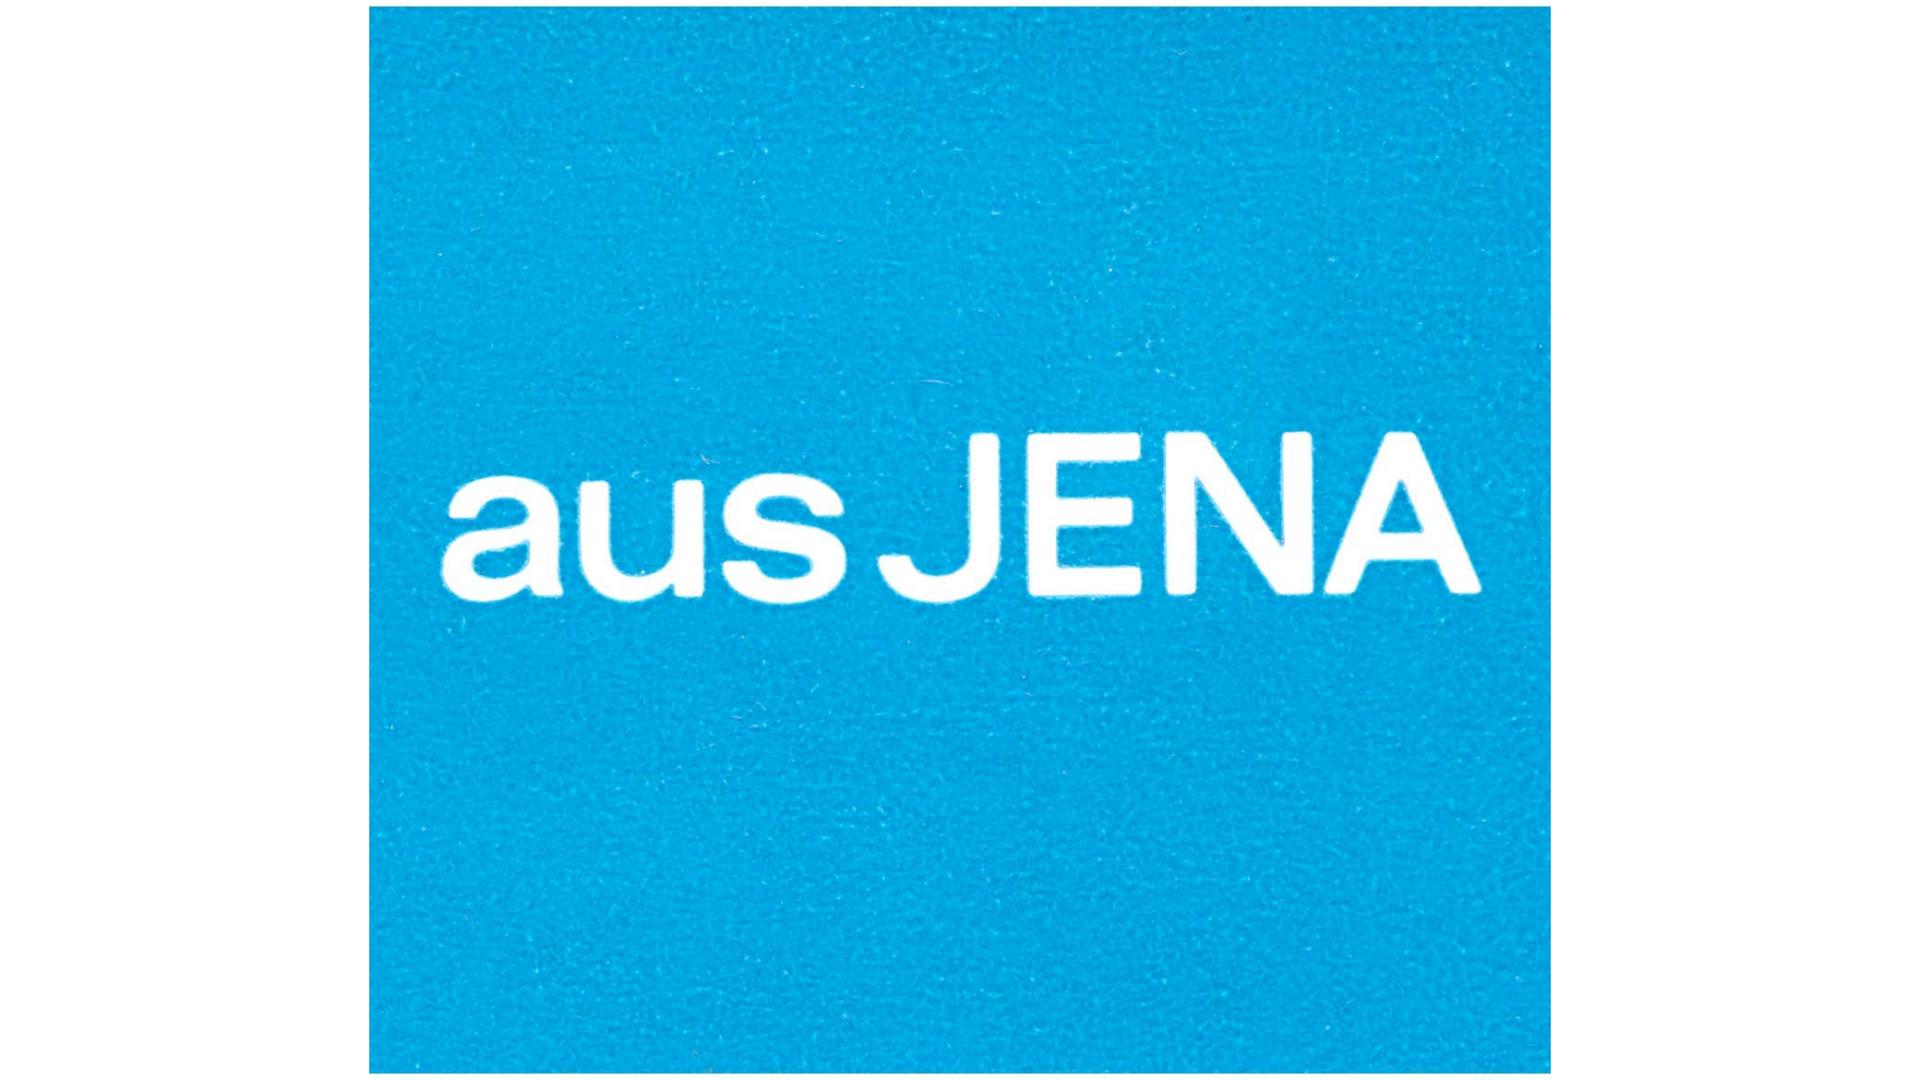 VEB Carl Zeiss Jena operated in Western countries with this logo.